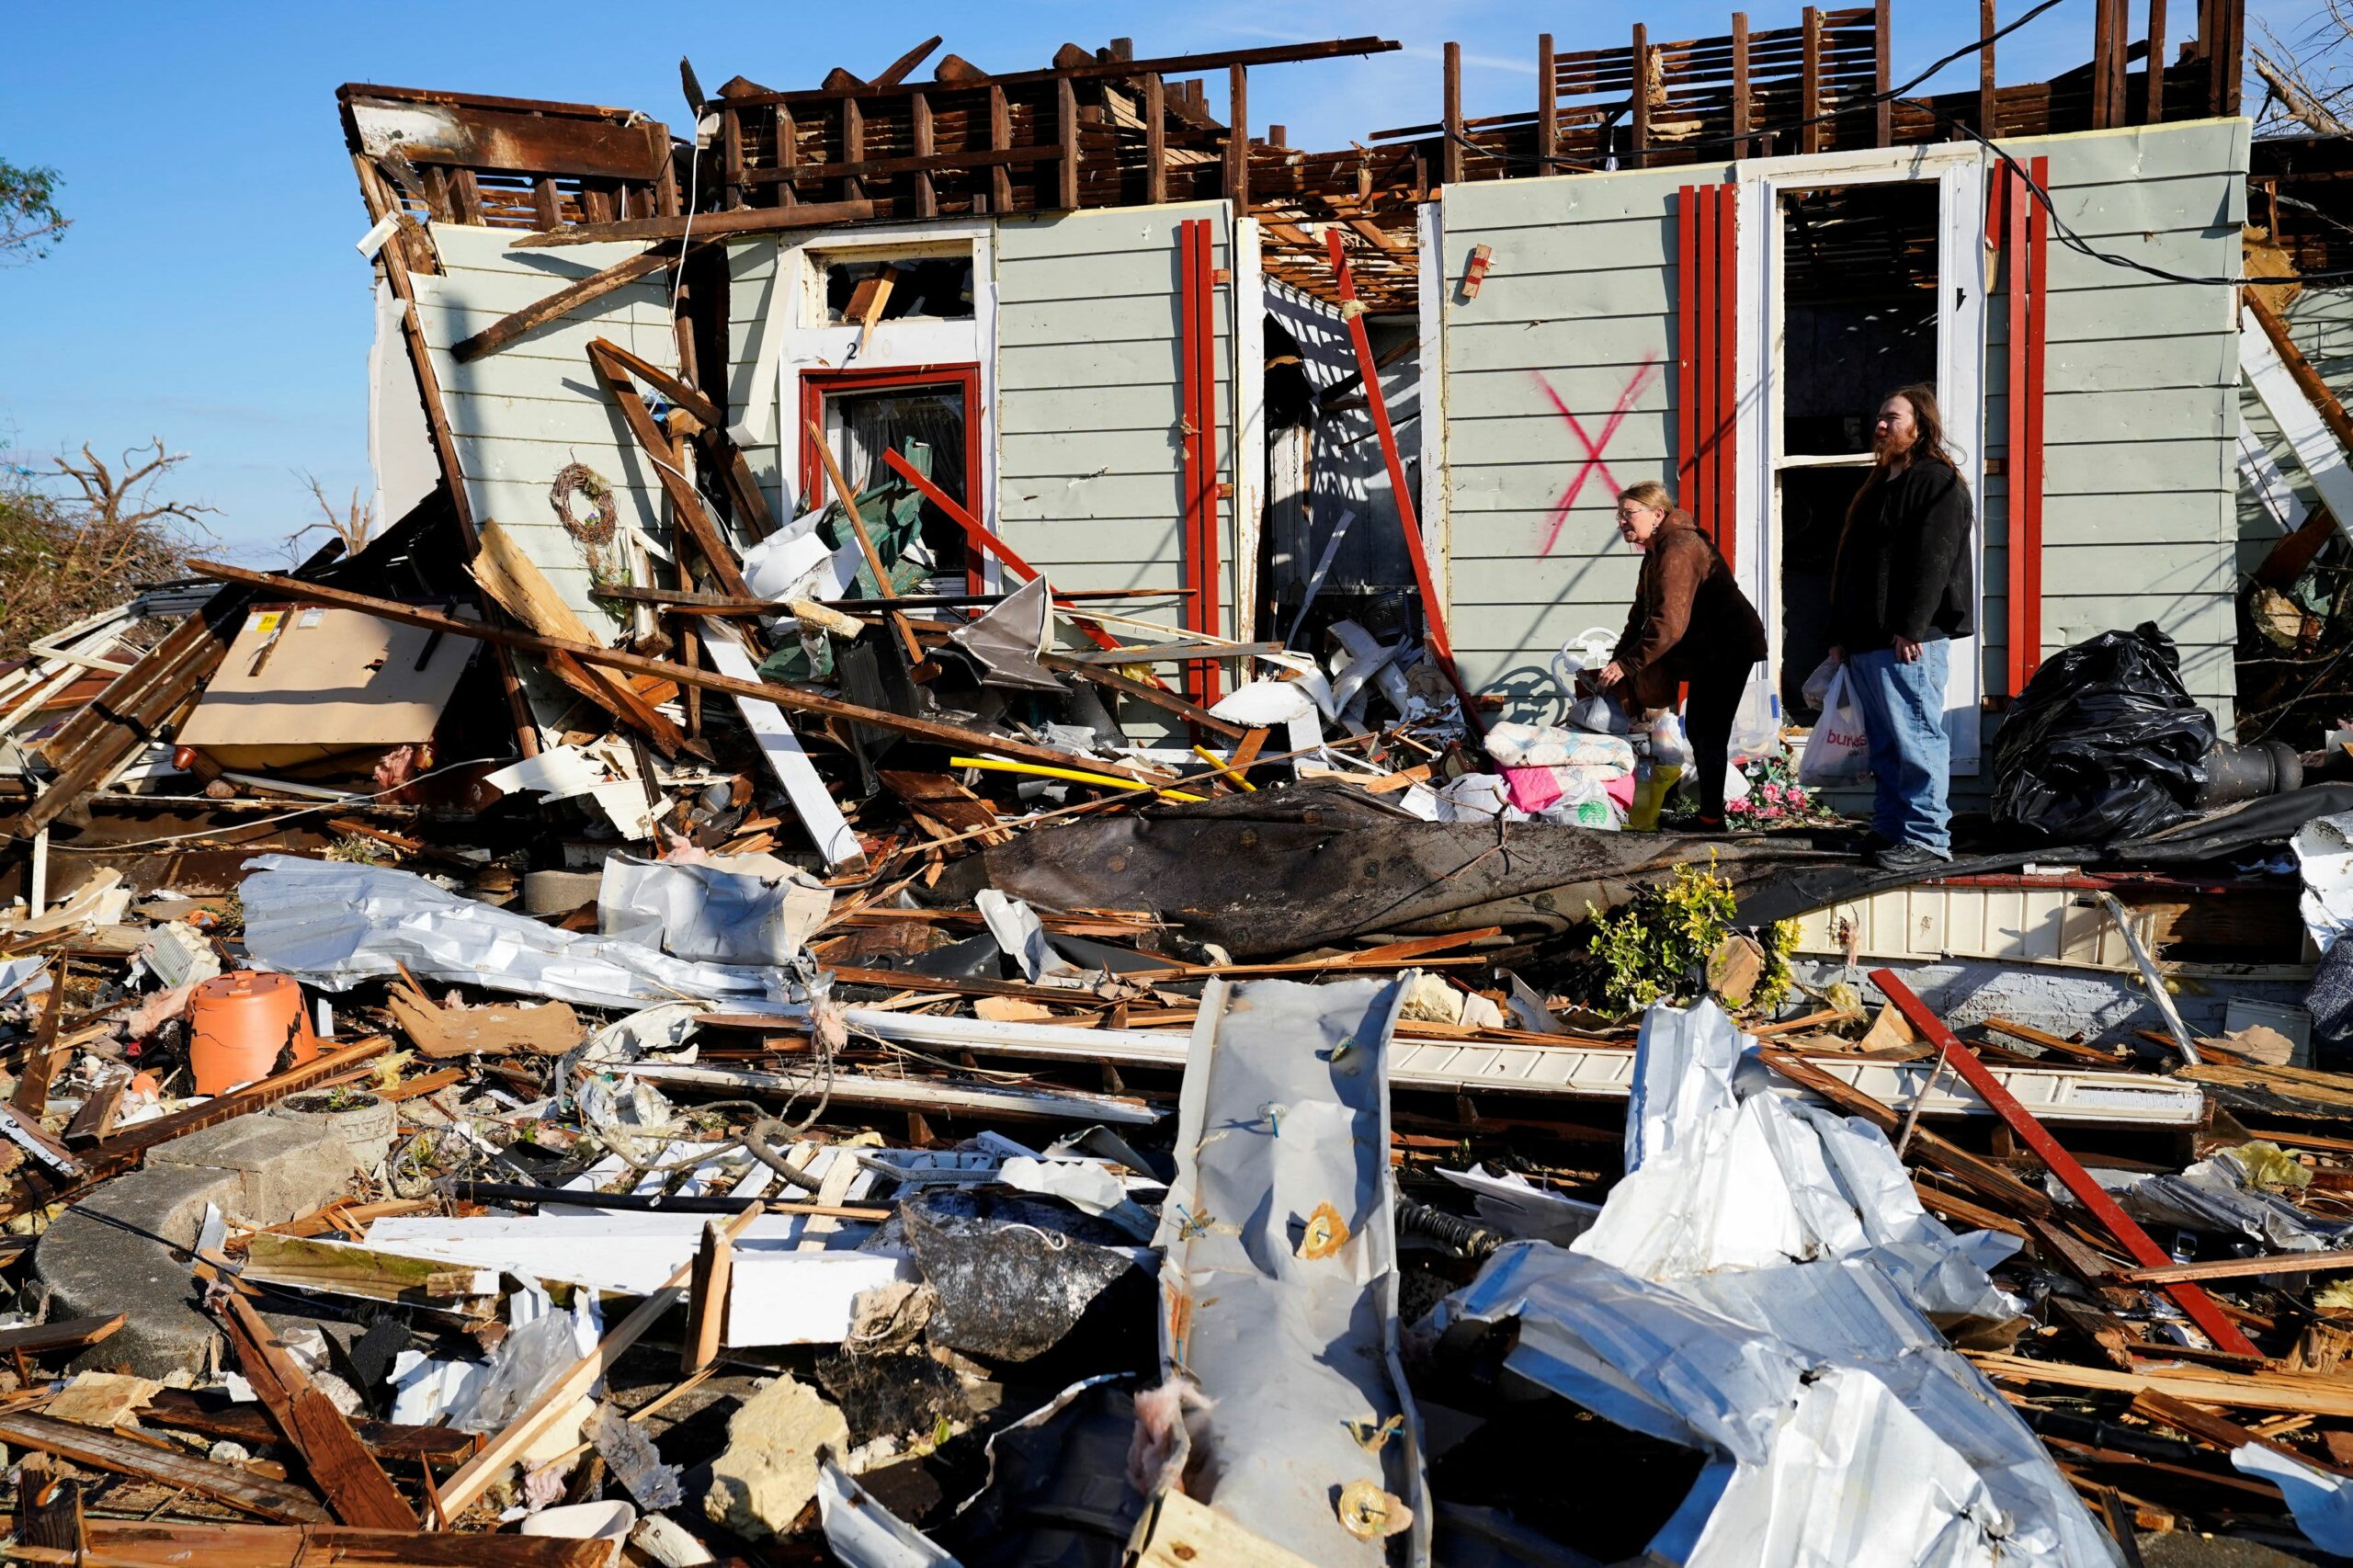 More than 80 killed in Kentucky after deadly tornadoes rip across several states